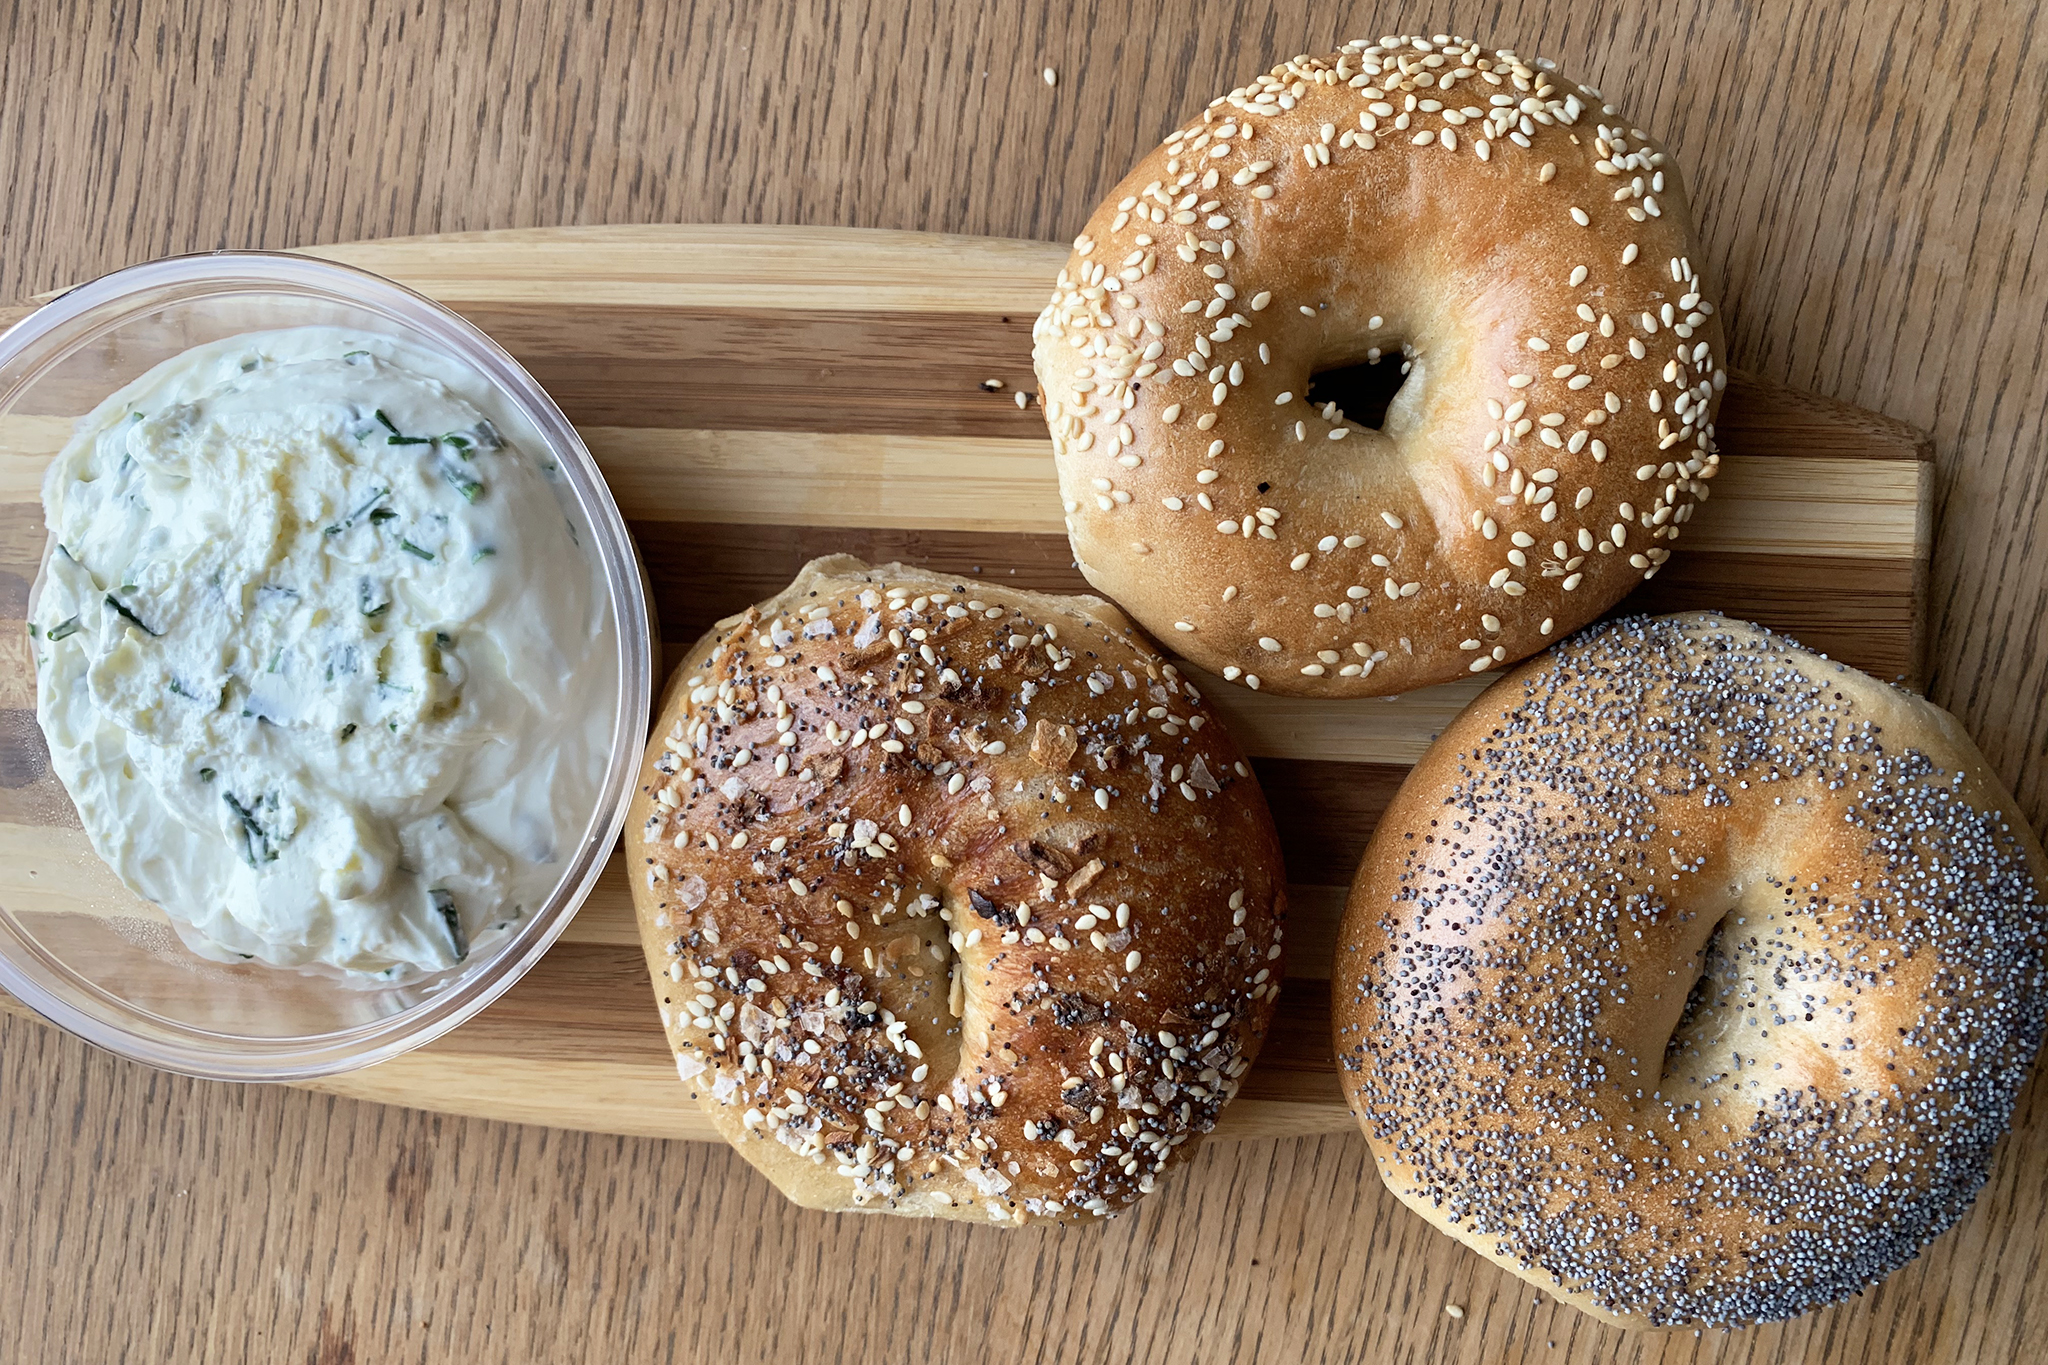 California’s bagel scene is better than New York’s, says the New York Times